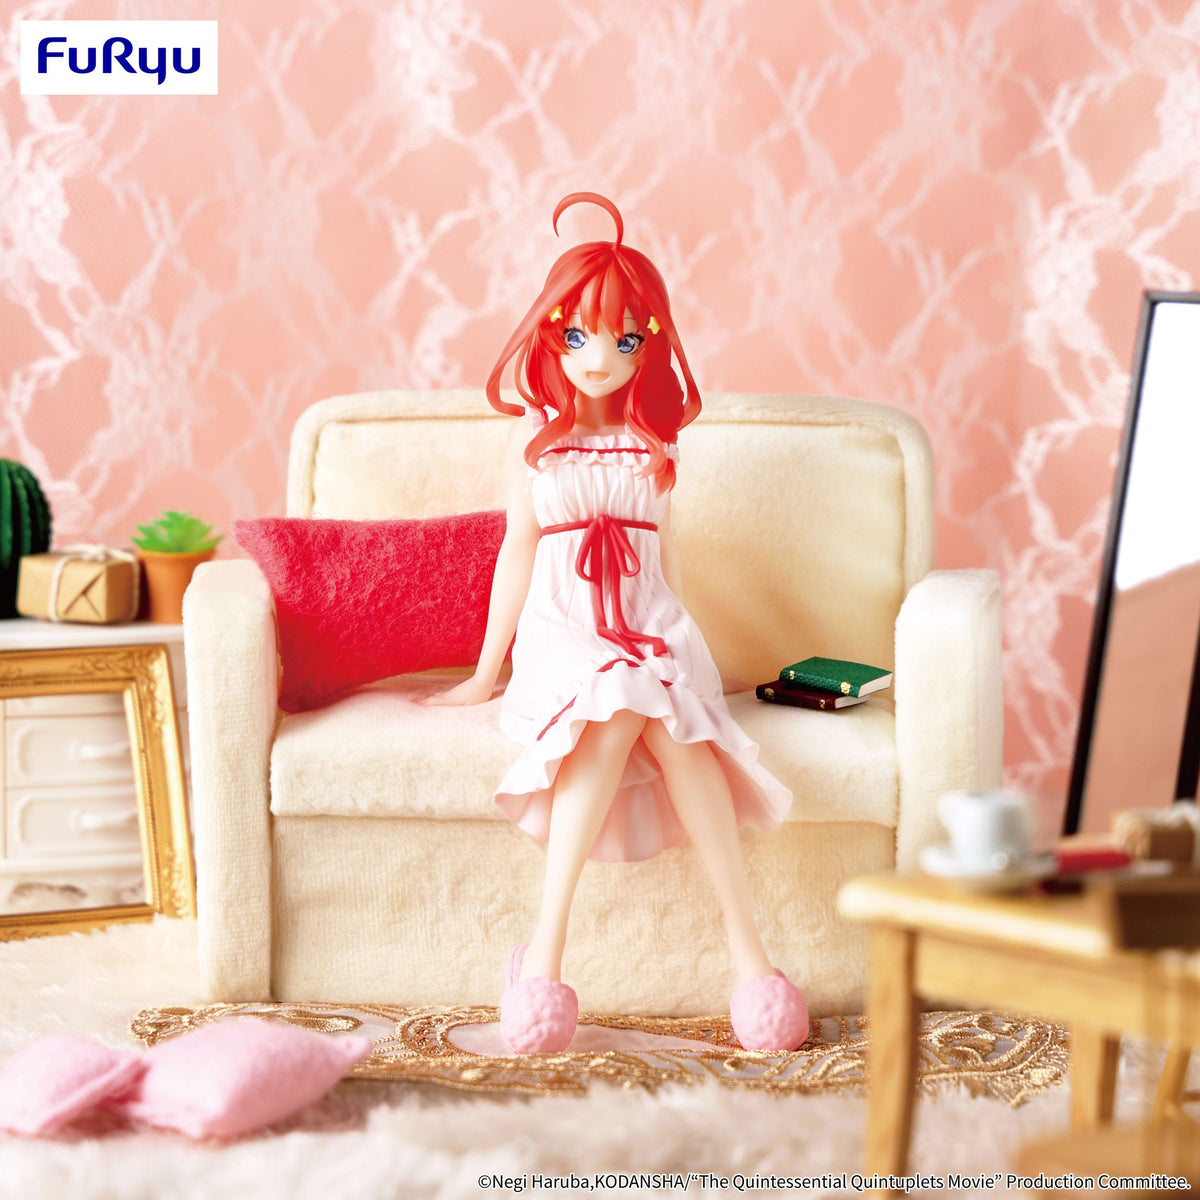 The Quintessential Quintuplets - Itsuki Nakano - Loungewear Noodle Stopper Figur (Furyu)